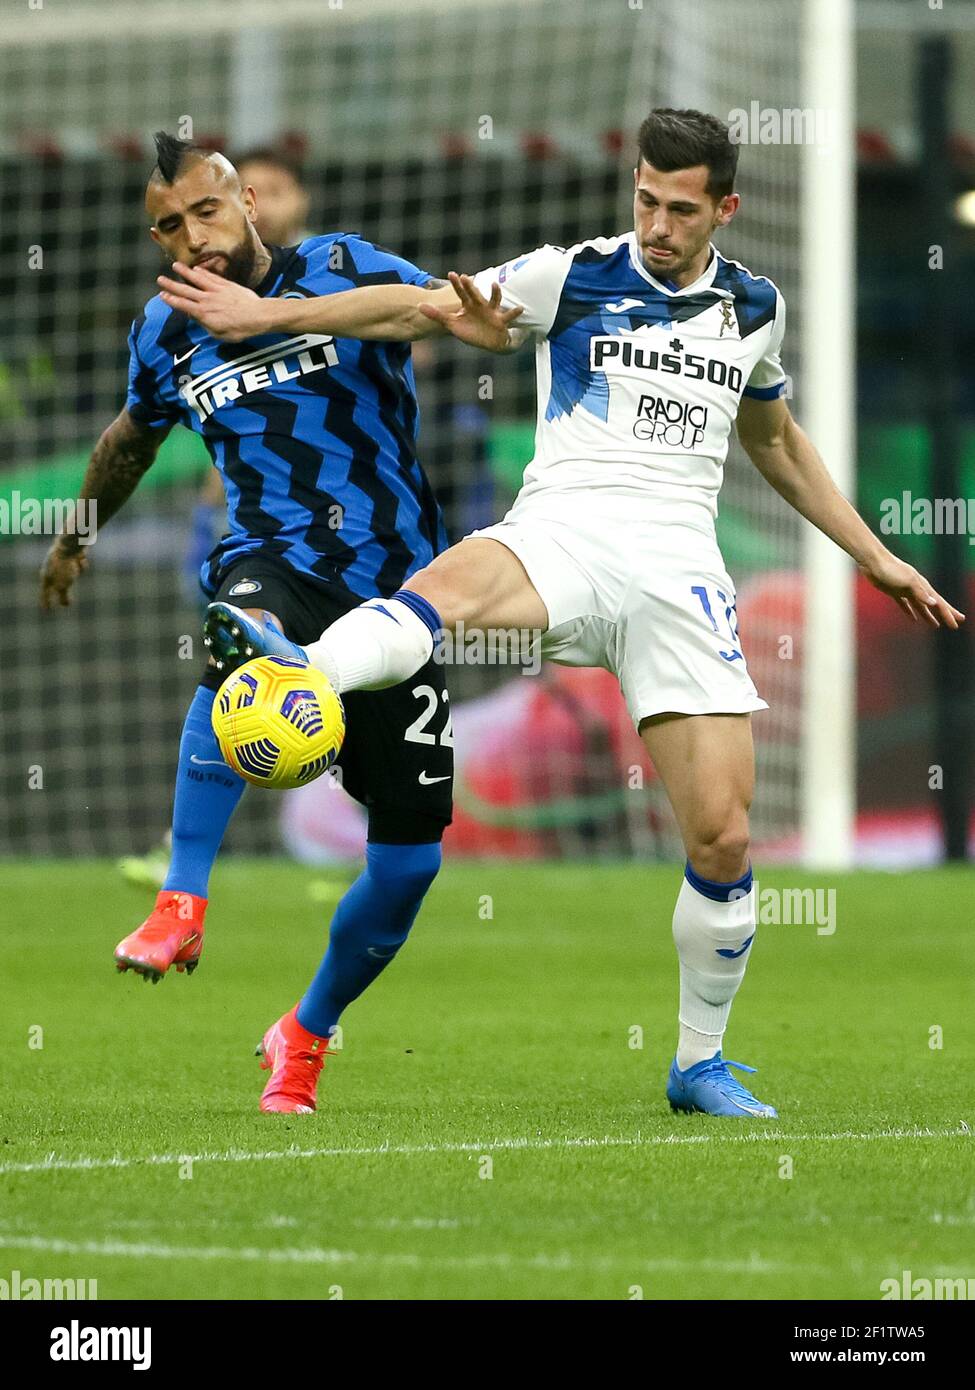 MILAN, ITALY - MARCH 8: Atruro Vidal of Internazionale and Remo Freuler of Atalanta battle for possession during the Serie A match between Internazion Stock Photo